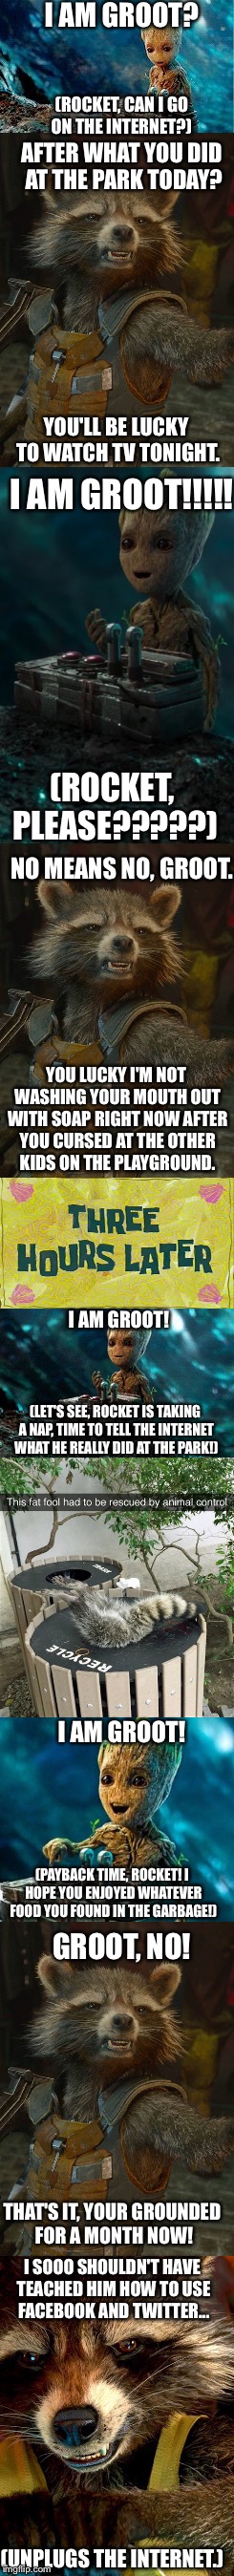 Groot's Internet Adventures  | I AM GROOT? (ROCKET, CAN I GO ON THE INTERNET?); AFTER WHAT YOU DID AT THE PARK TODAY? YOU'LL BE LUCKY TO WATCH TV TONIGHT. I AM GROOT!!!!! (ROCKET, PLEASE?????); NO MEANS NO, GROOT. YOU LUCKY I'M NOT WASHING YOUR MOUTH OUT WITH SOAP RIGHT NOW AFTER YOU CURSED AT THE OTHER KIDS ON THE PLAYGROUND. I AM GROOT! (LET'S SEE, ROCKET IS TAKING A NAP, TIME TO TELL THE INTERNET WHAT HE REALLY DID AT THE PARK!); I AM GROOT! (PAYBACK TIME, ROCKET! I HOPE YOU ENJOYED WHATEVER FOOD YOU FOUND IN THE GARBAGE!); GROOT, NO! THAT'S IT, YOUR GROUNDED FOR A MONTH NOW! I SOOO SHOULDN'T HAVE TEACHED HIM HOW TO USE FACEBOOK AND TWITTER... (UNPLUGS THE INTERNET.) | image tagged in groot,rocket raccoon,internet,memes,twitter,facebook | made w/ Imgflip meme maker